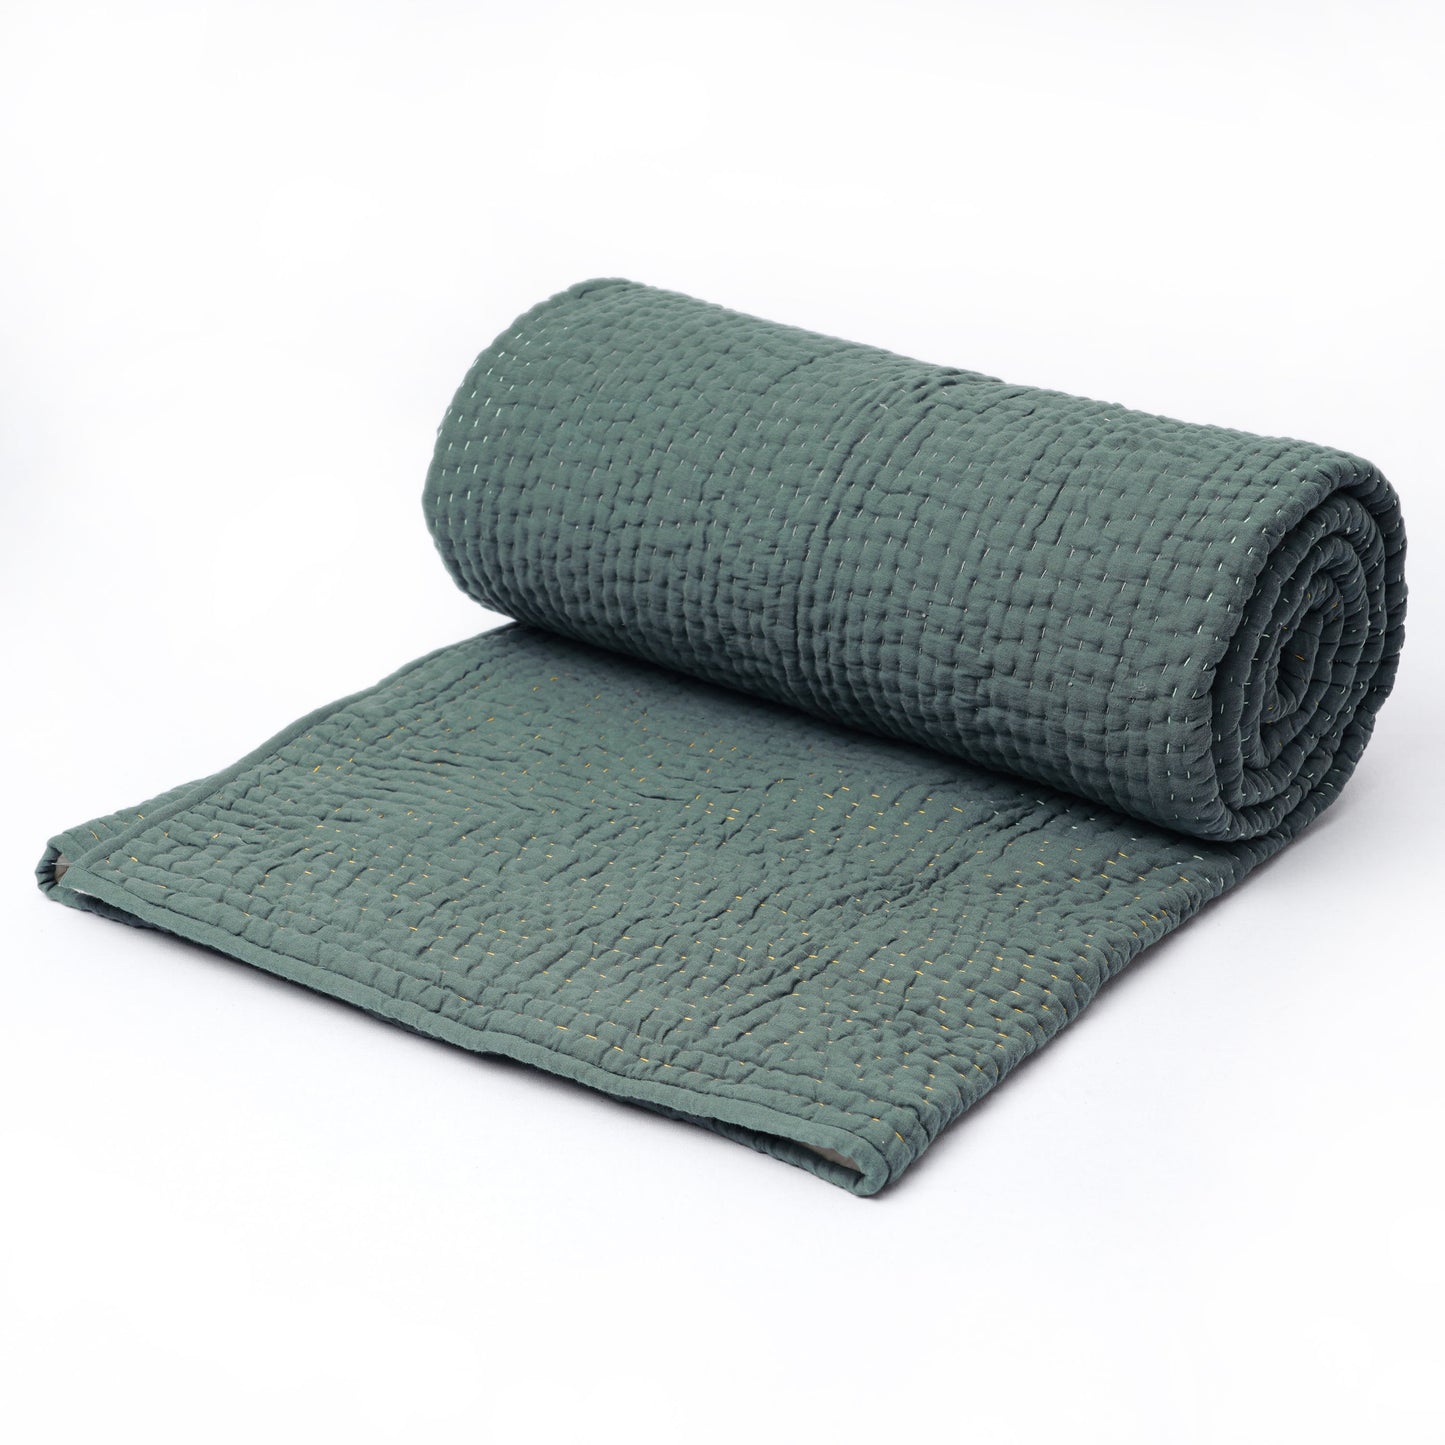 Olive Green quilted sets or quilts - hand quilted 4 layer muslin gauze, sizes available